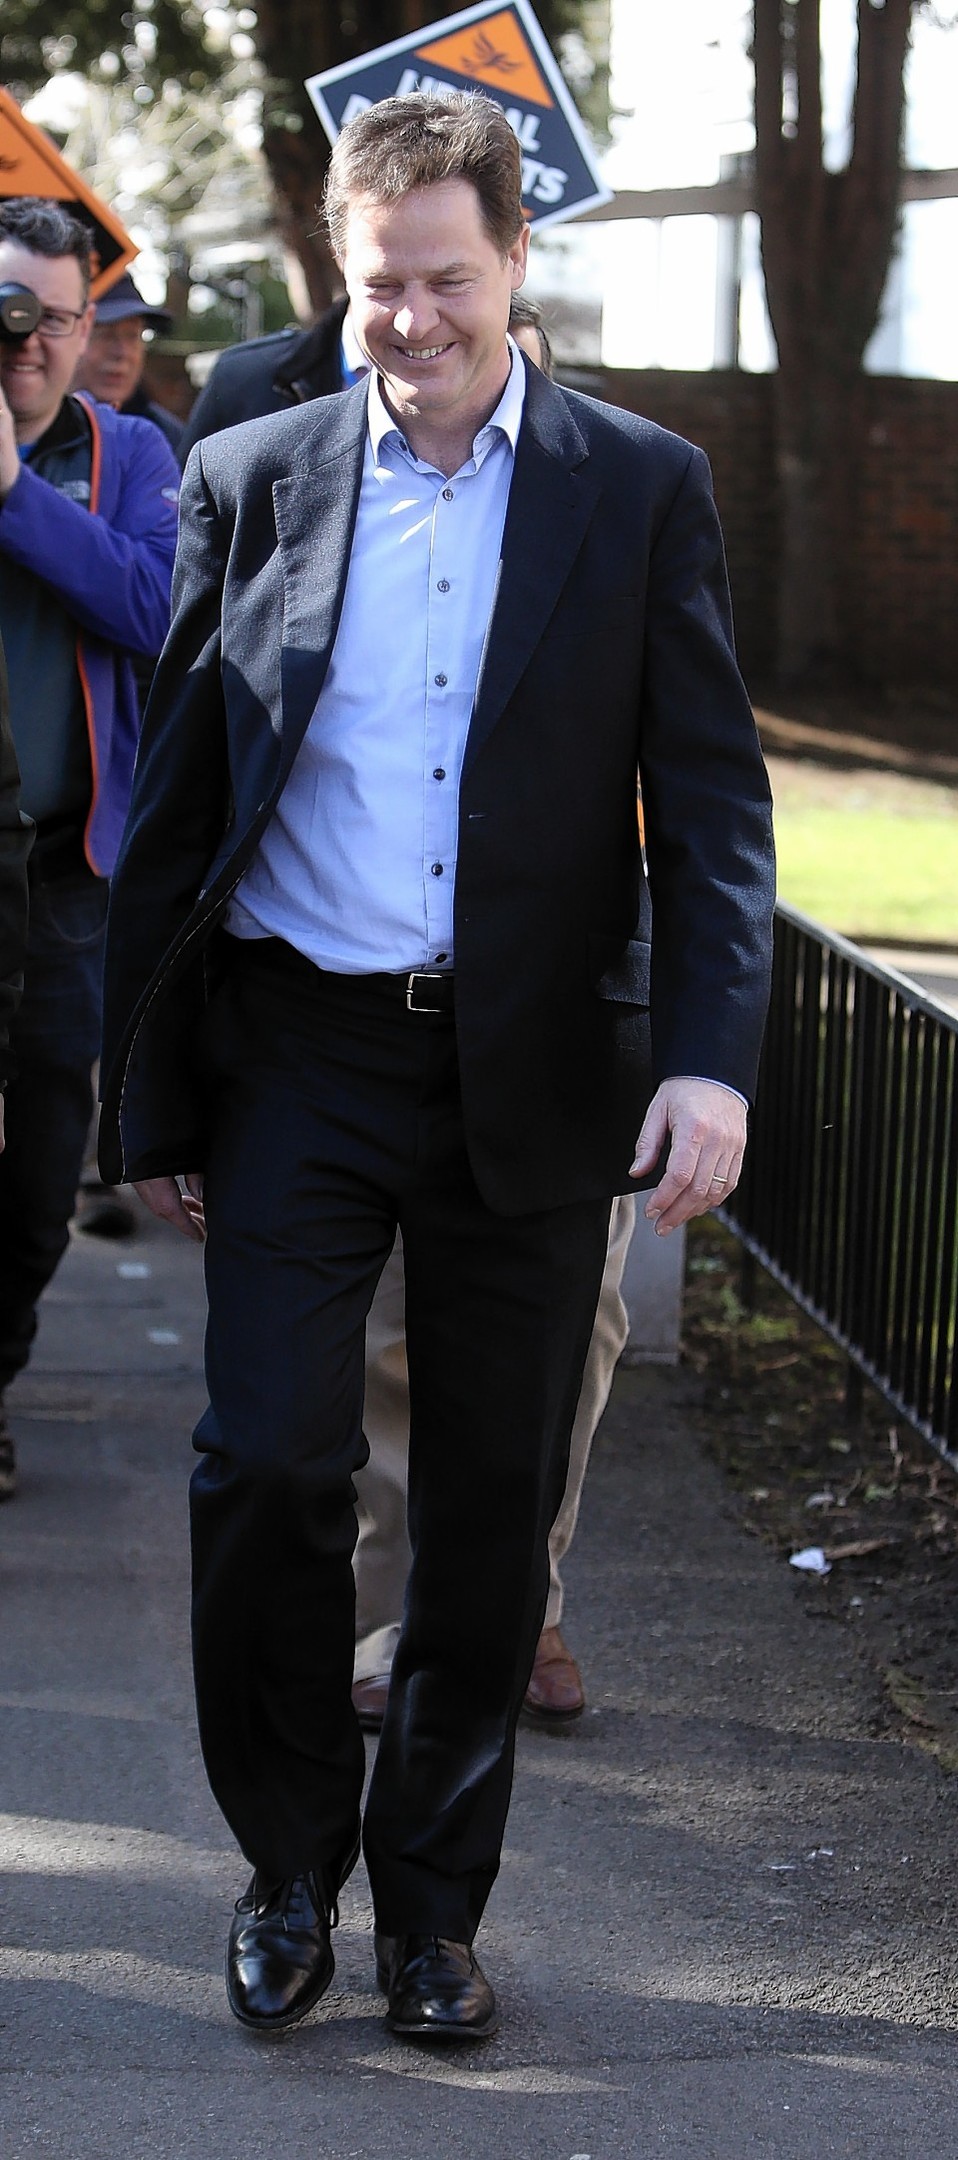 Liberal Democrat leader Nick Clegg while out campaigning in Surbiton, London. 